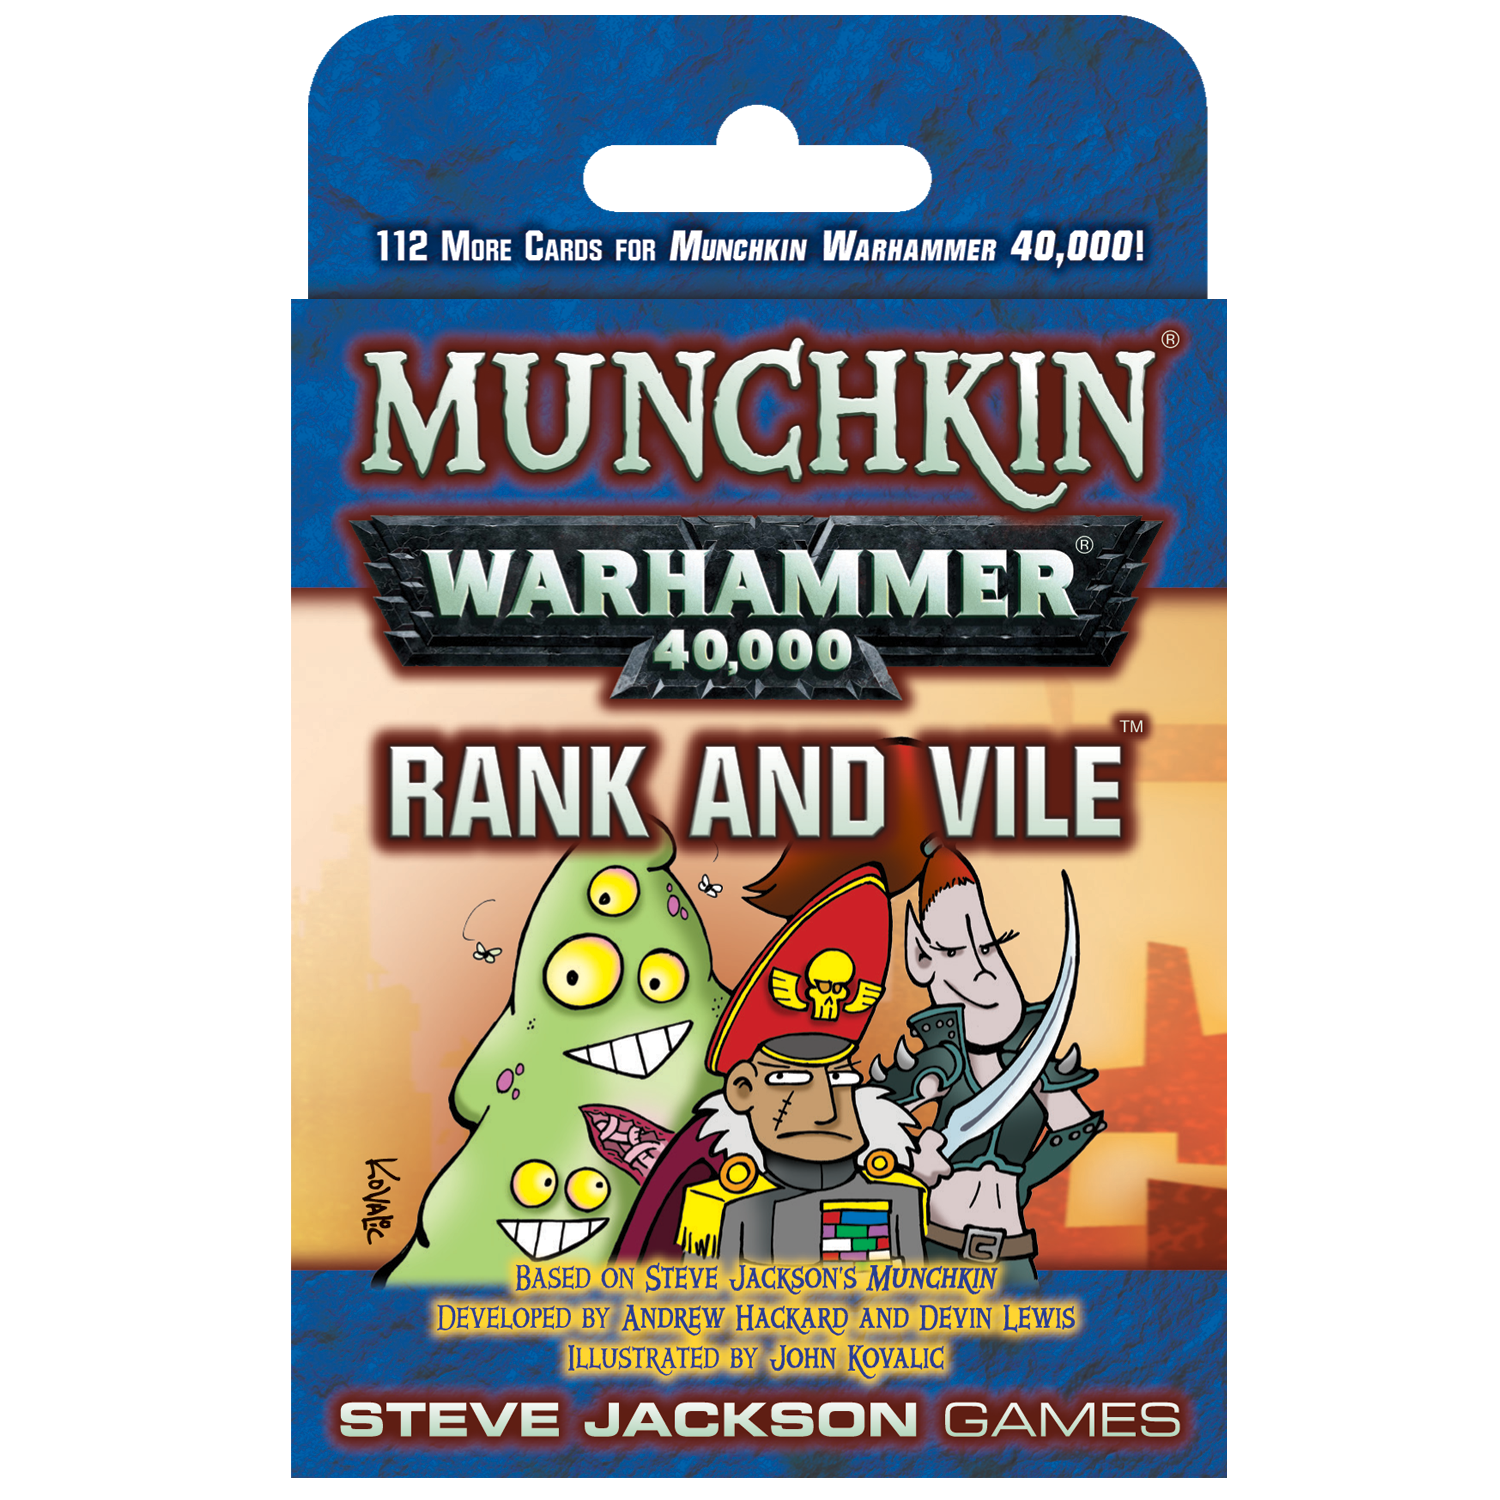 Munchkin: Warhammer 40,000 - Rank and Vile Expansion - Bards & Cards